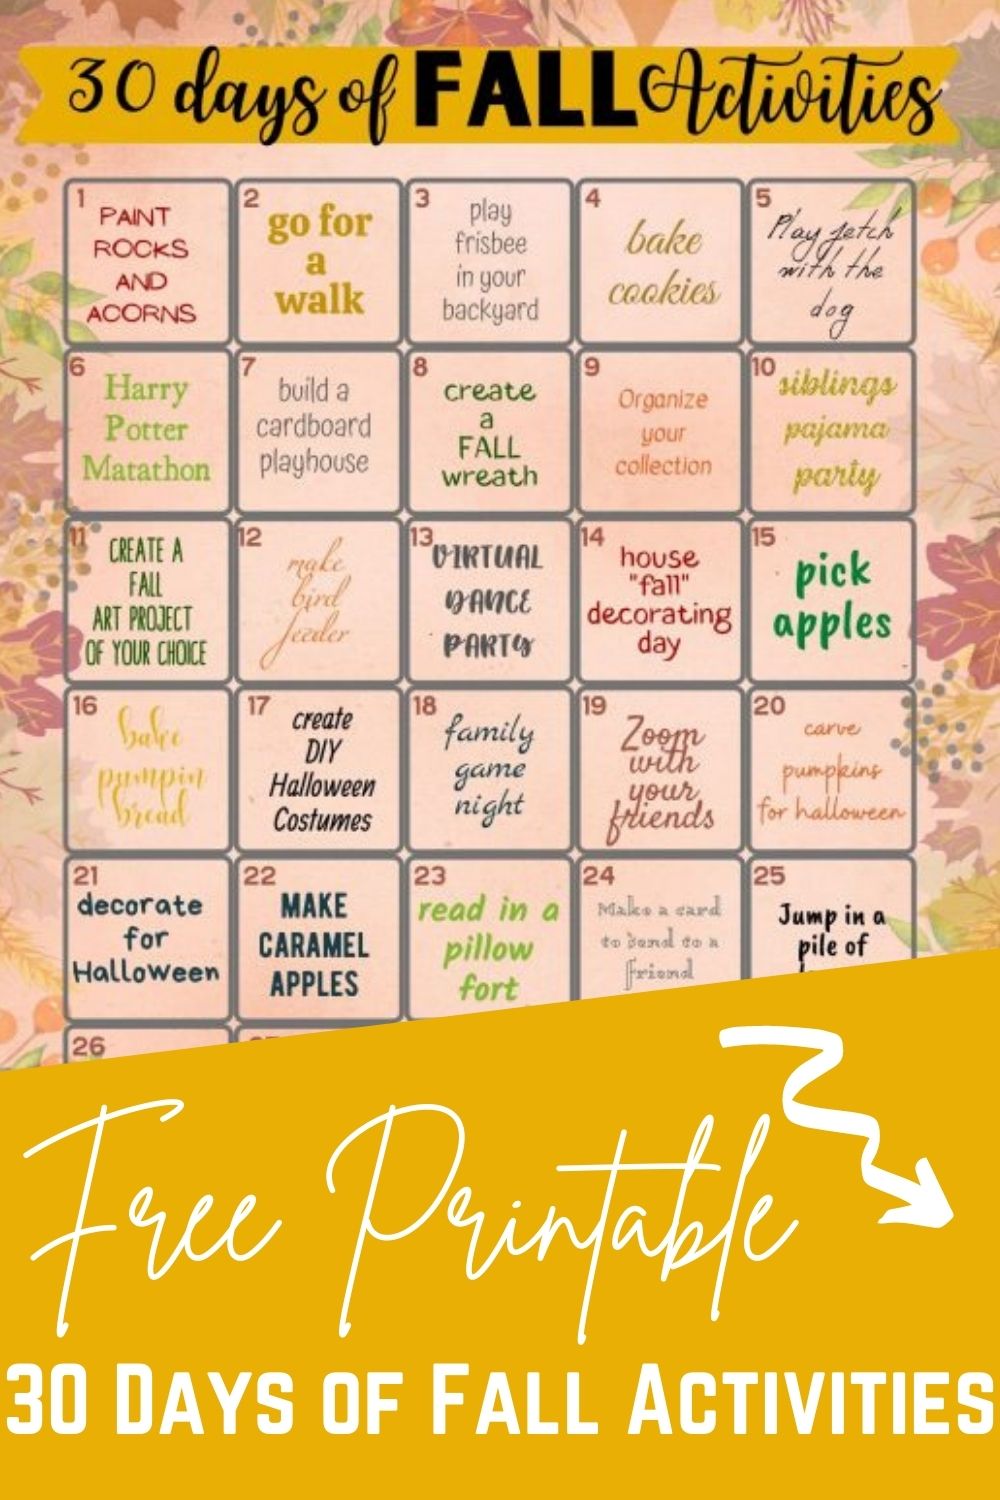 Free Printable 30 Days of Fall Activities